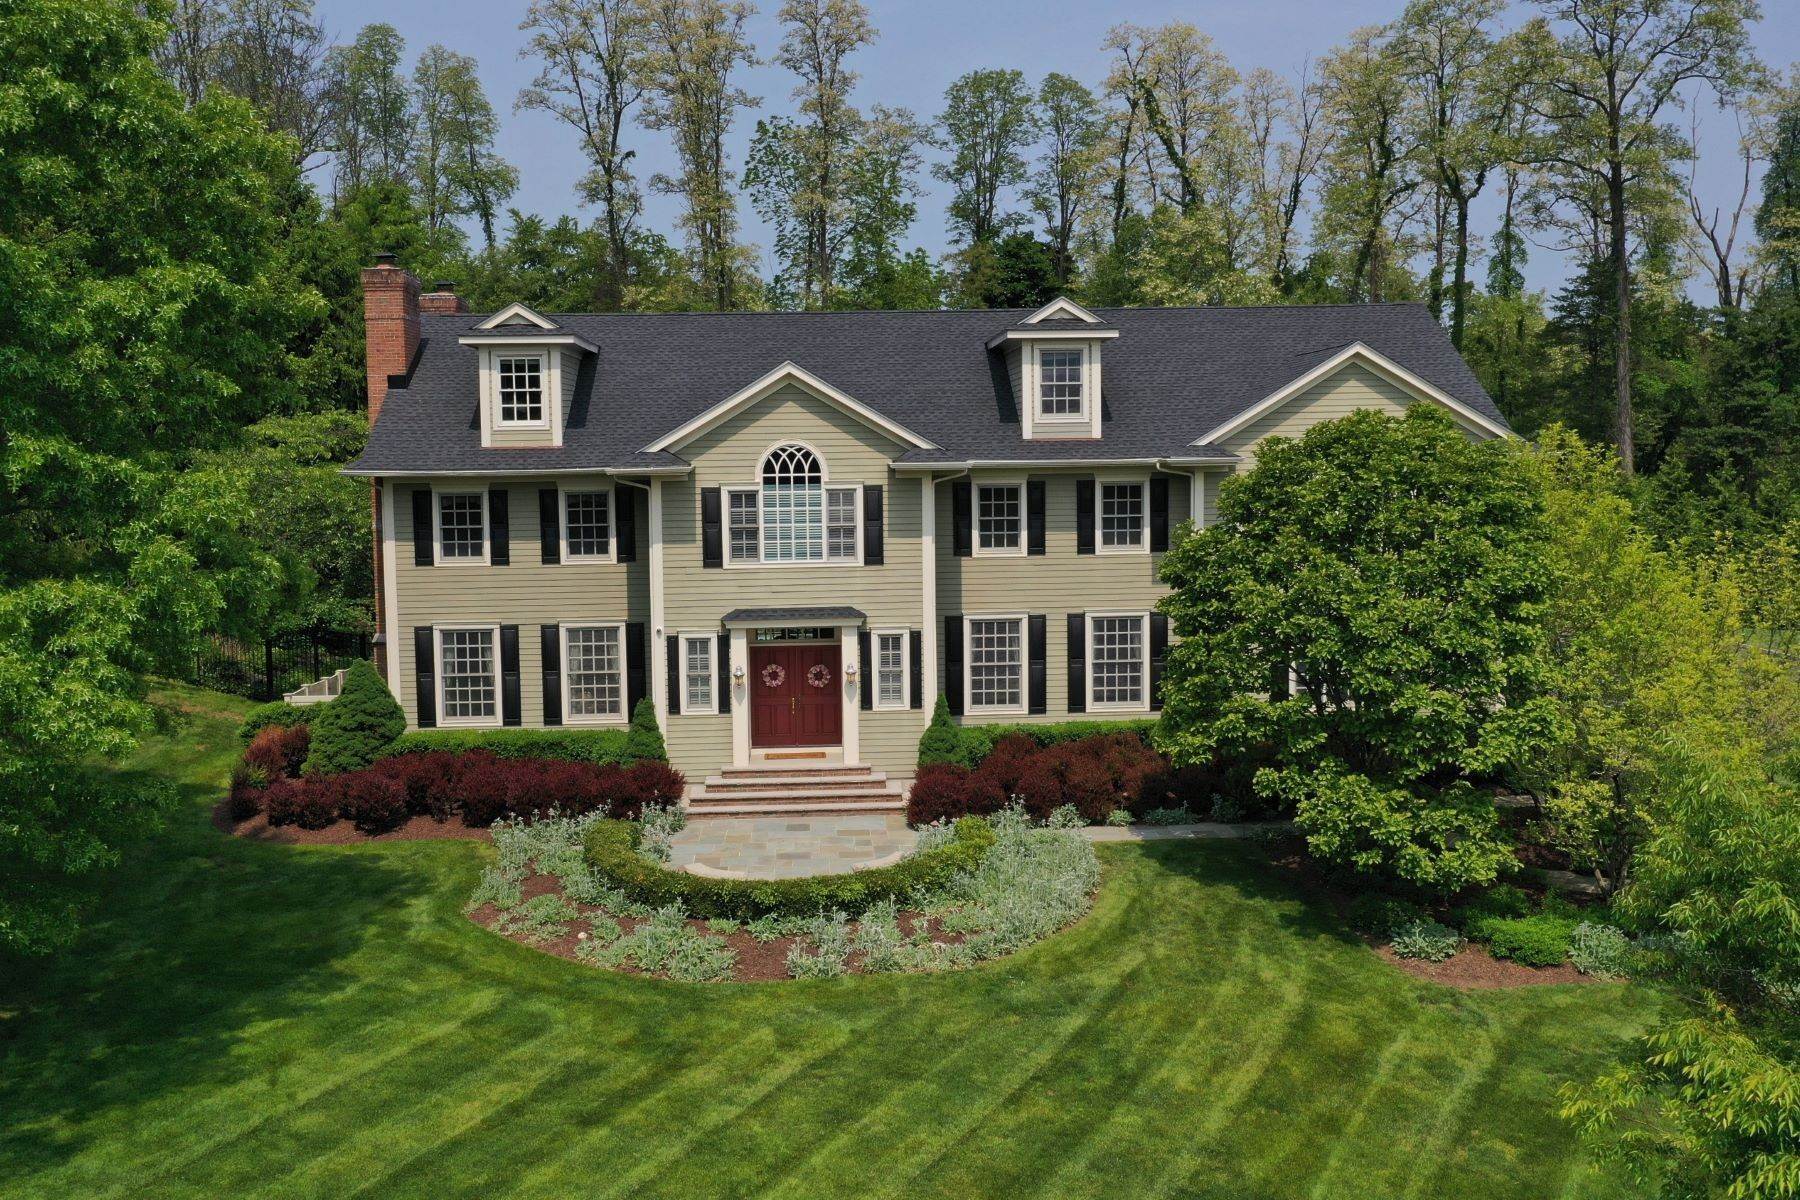 Single Family Homes for Sale at Captivating Custom Colonial with Backyard Oasis 8 Windymere Lane Mendham, New Jersey 07945 United States